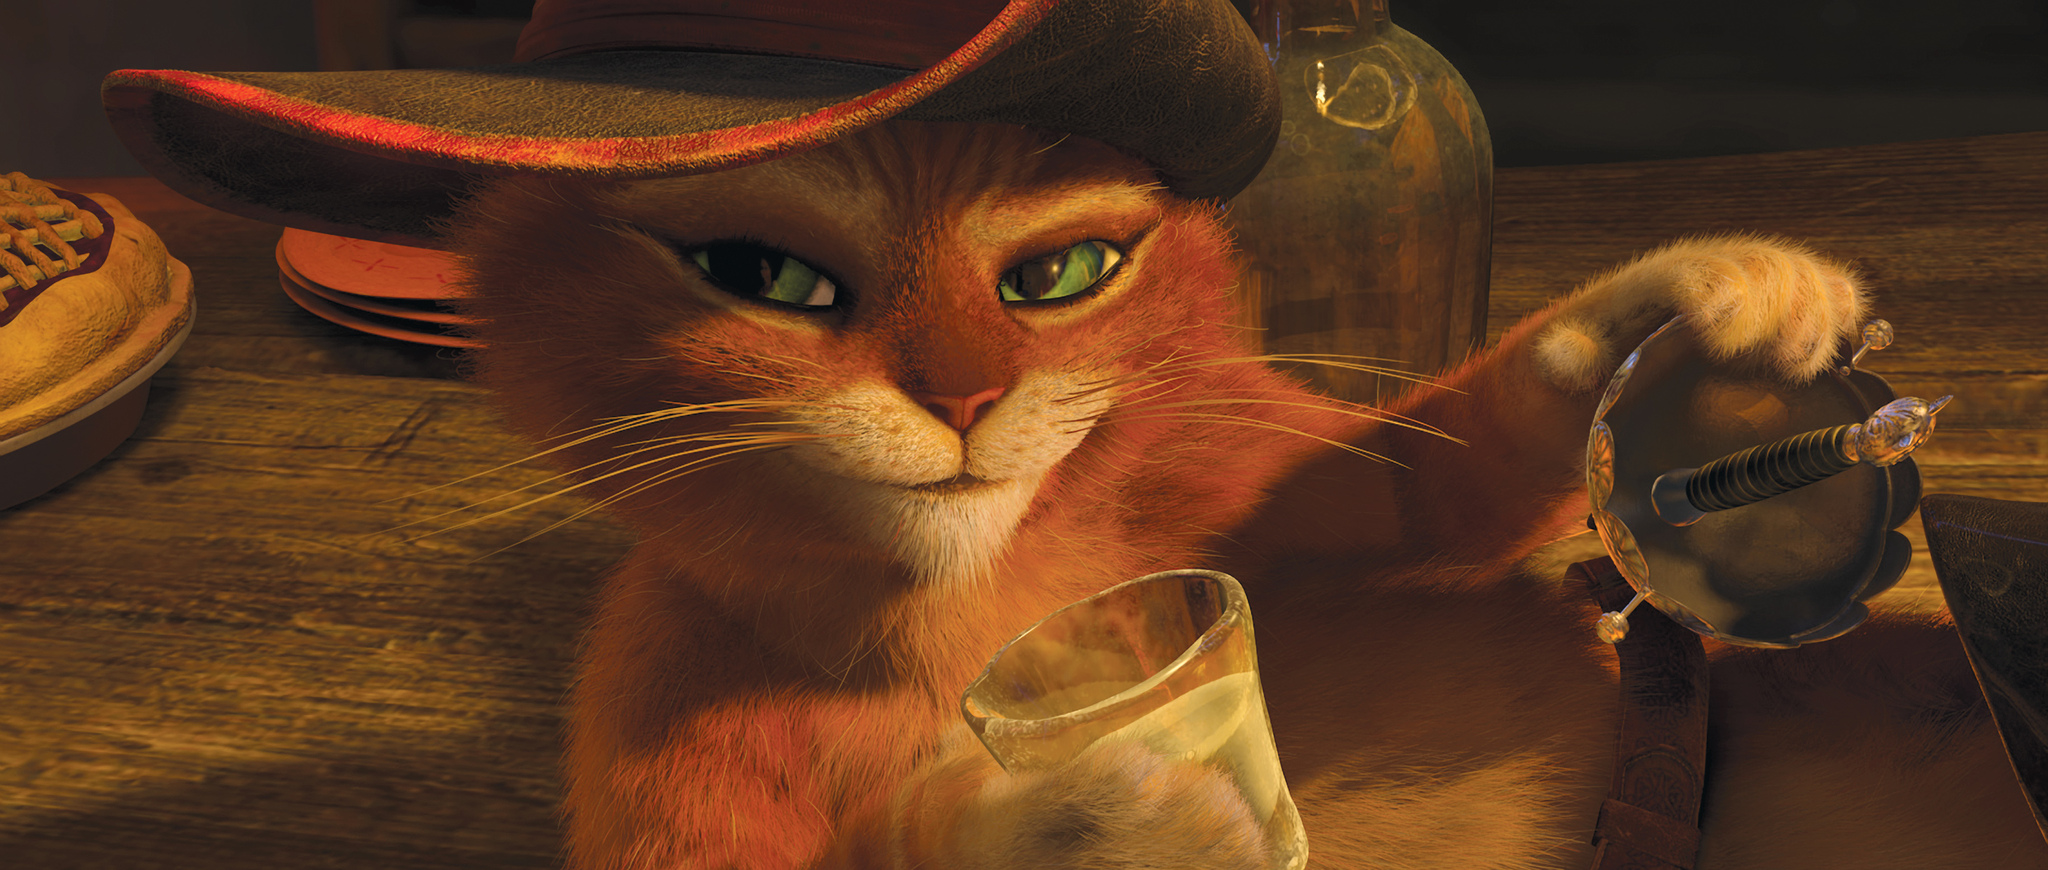 8 Animated Movies Like Puss in Boots You Must See